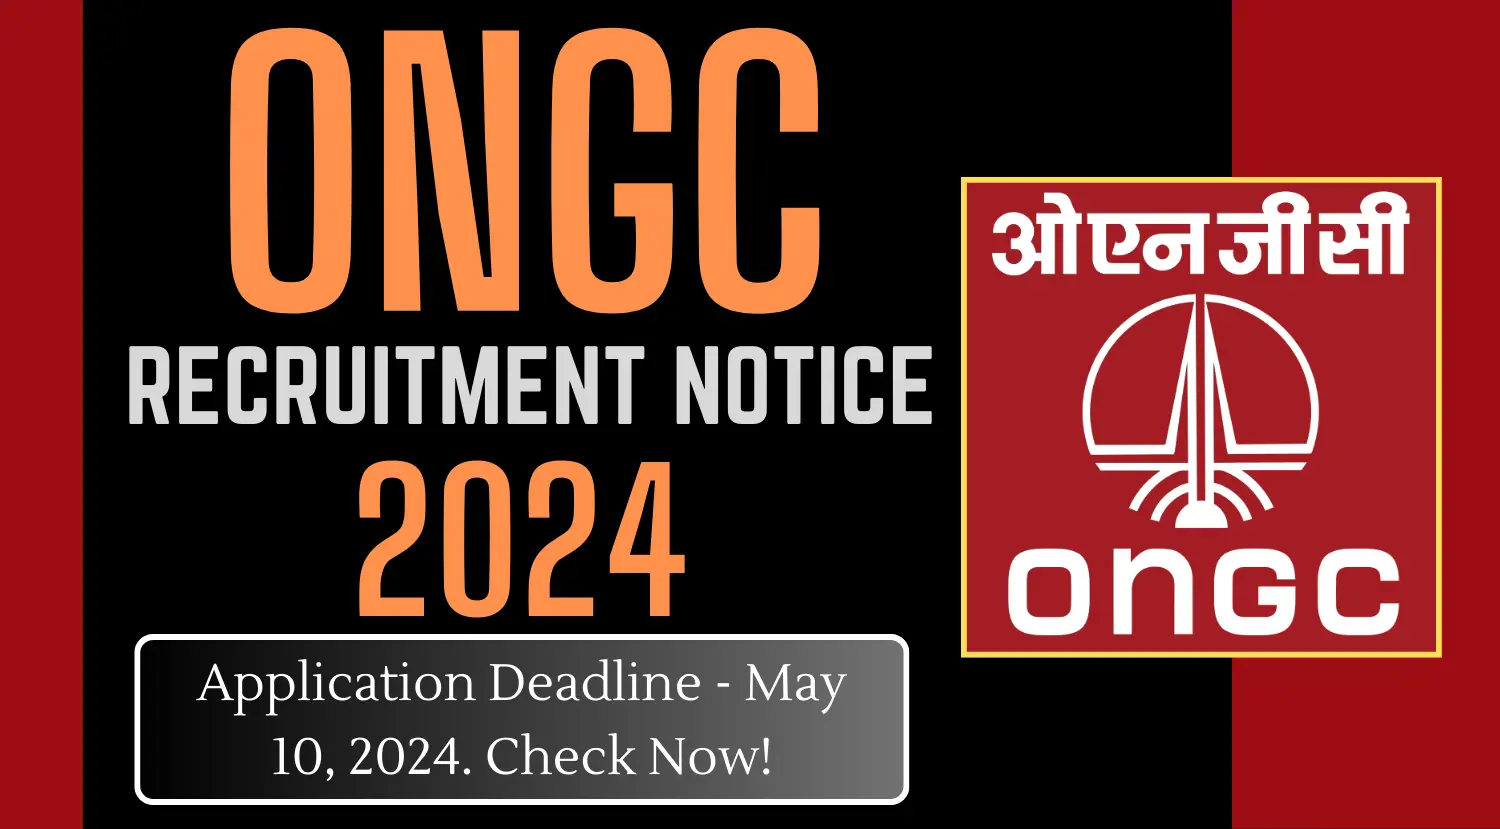 ONGC Recruitment 2024 Application Deadline - May 10 2024 Check Now